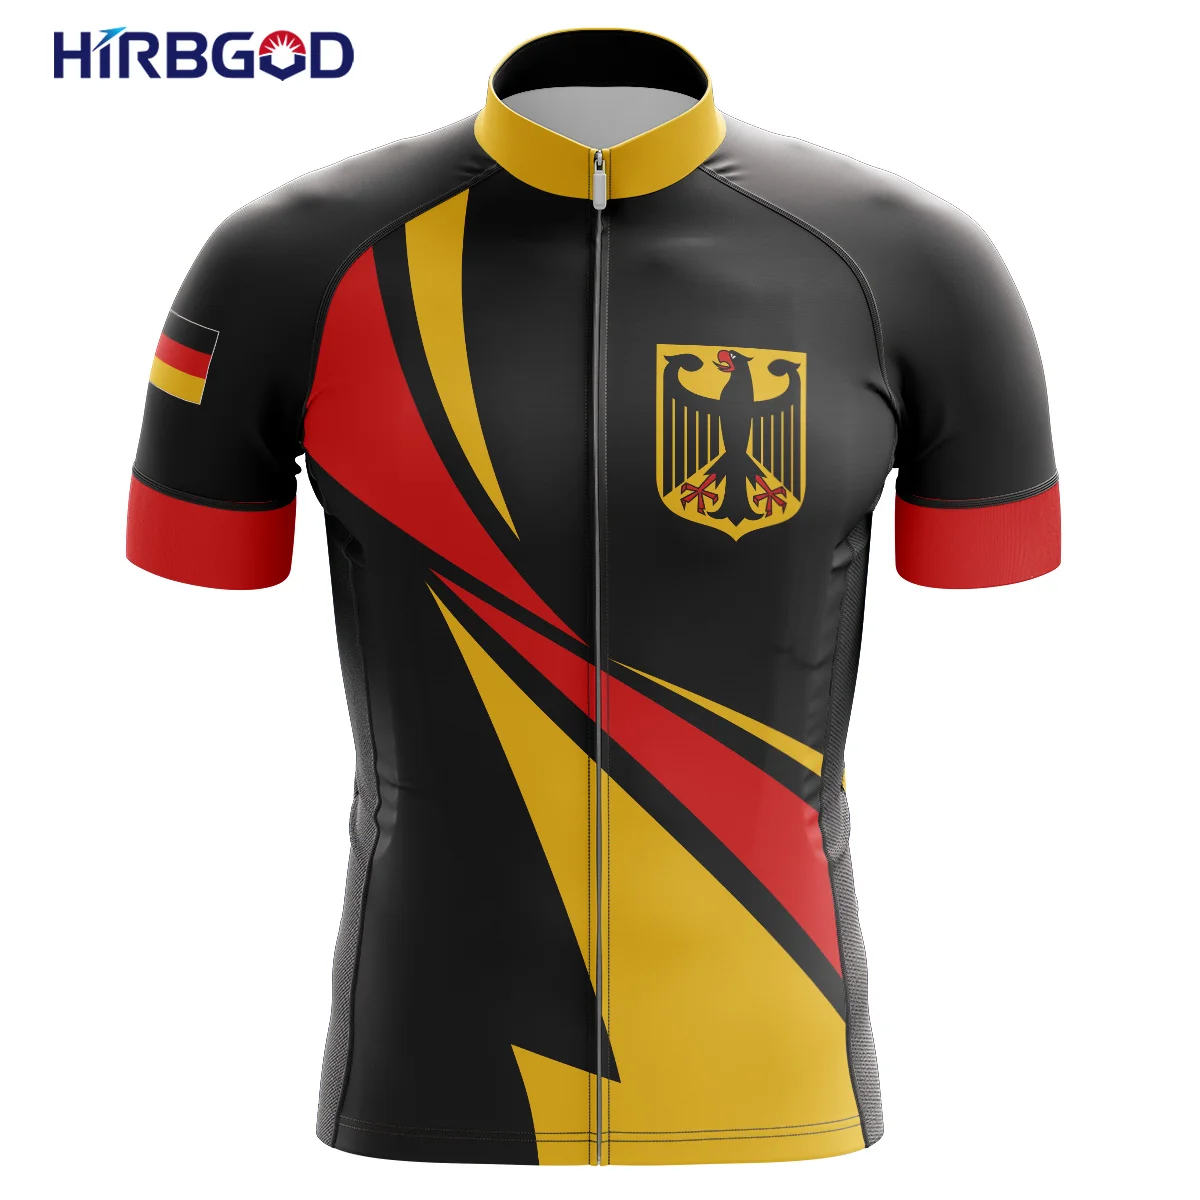 

HIRBGOD 2021 New for German Series Men's Cycling Jersey Summer Breathable Close-Fitting Short-Sleeved Sports Shirt, TYZ894-01